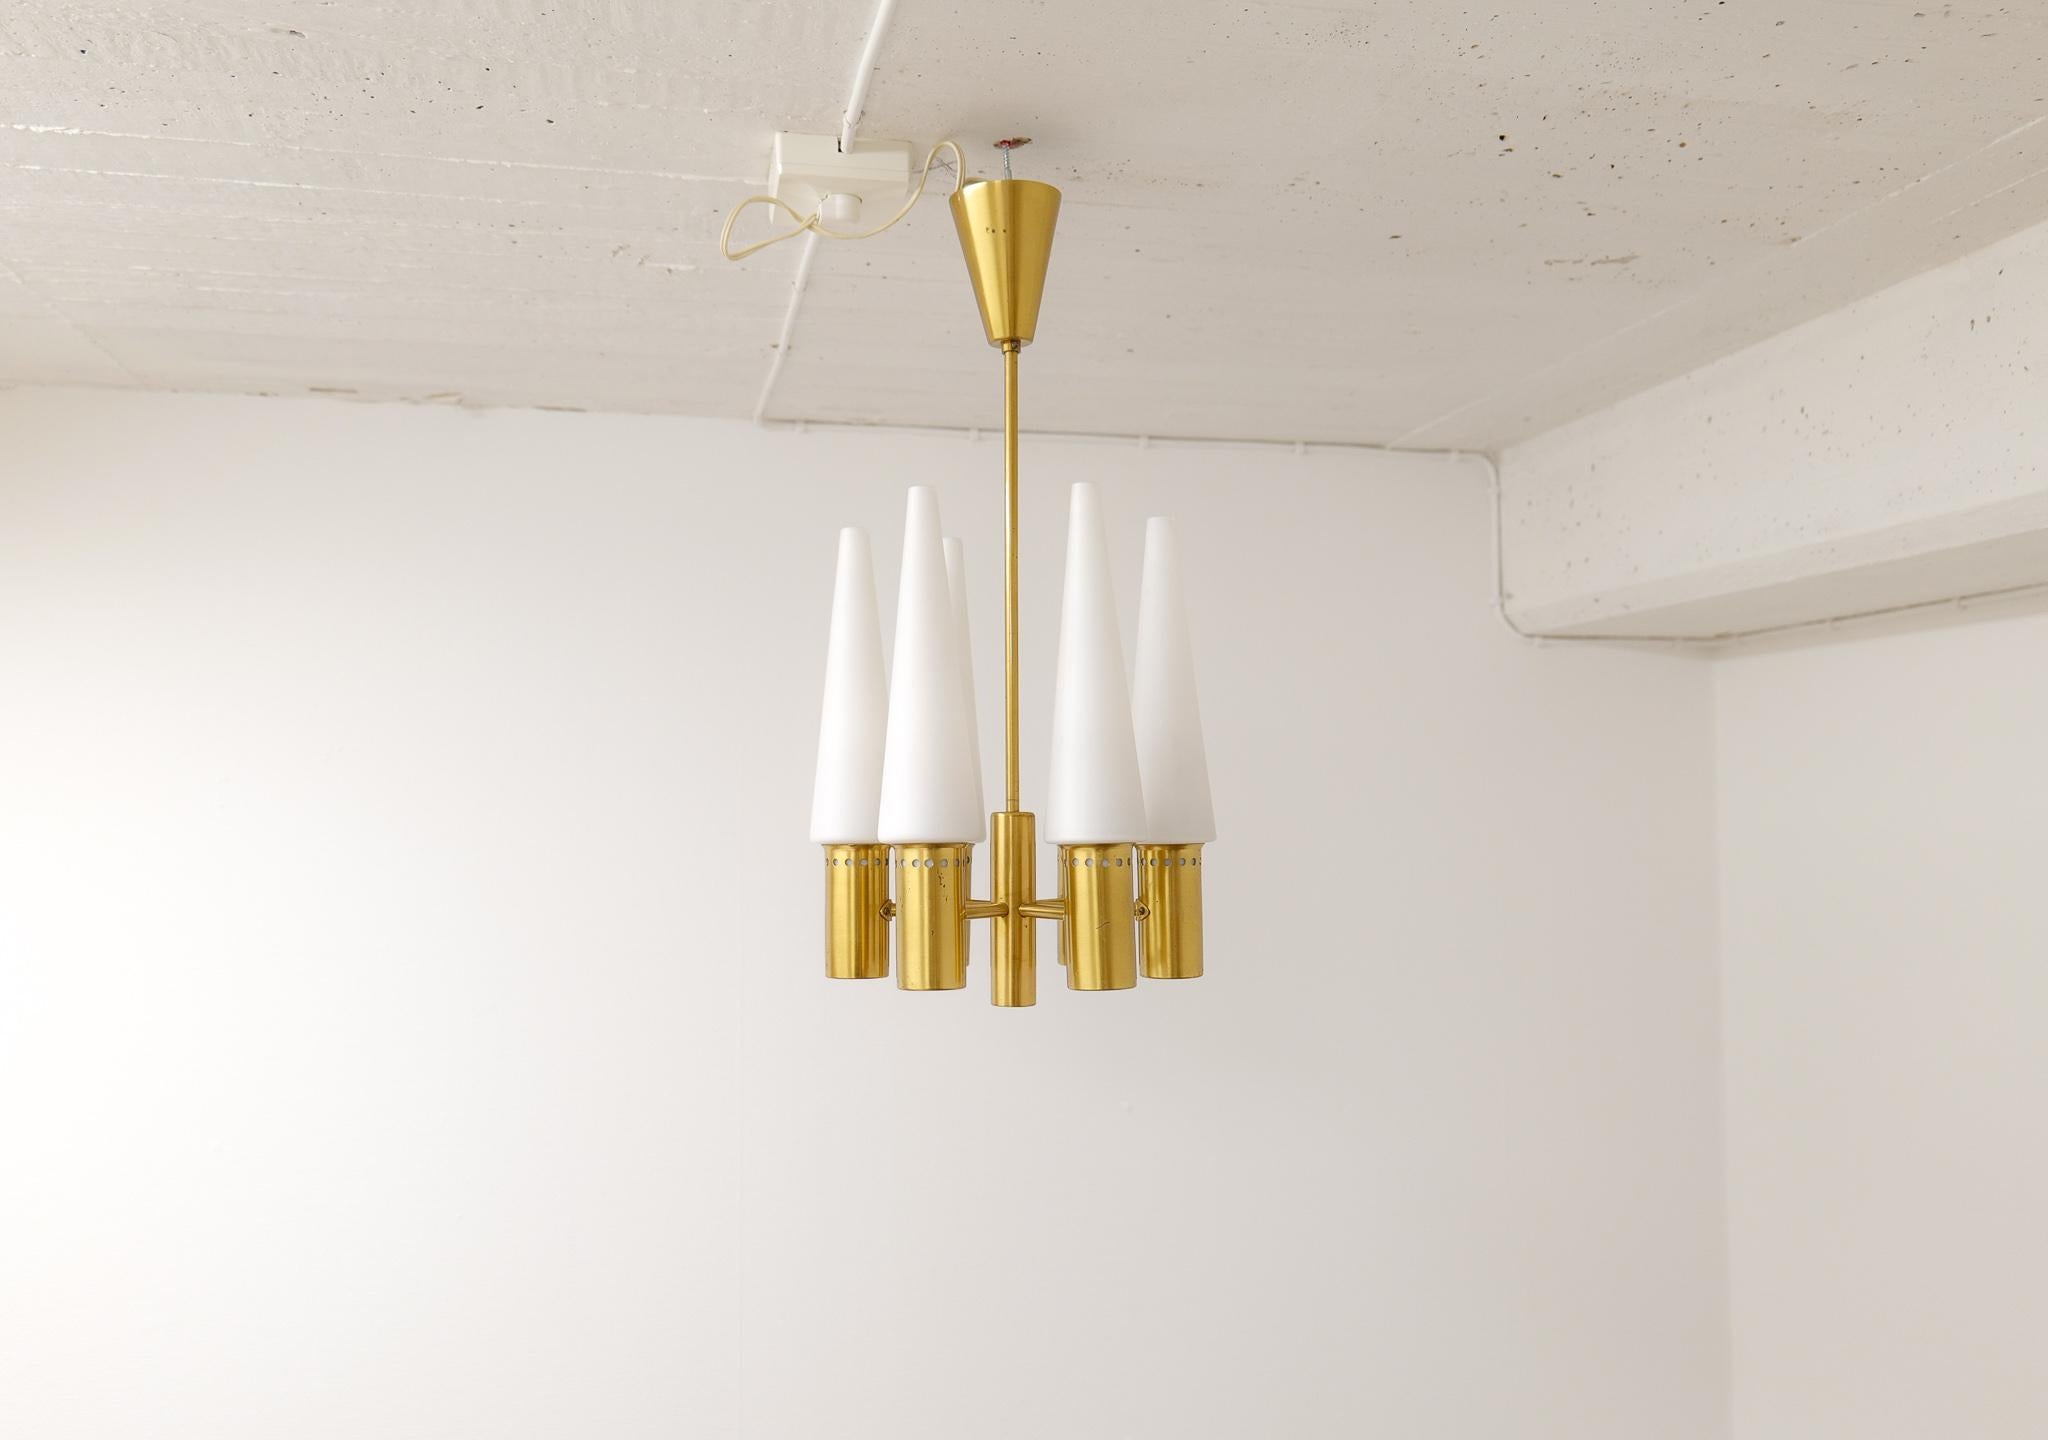 Midcentury Hans-Agne Jakobsson Brass and Opaline Ceiling Lamp, Sweden, 1950s For Sale 6